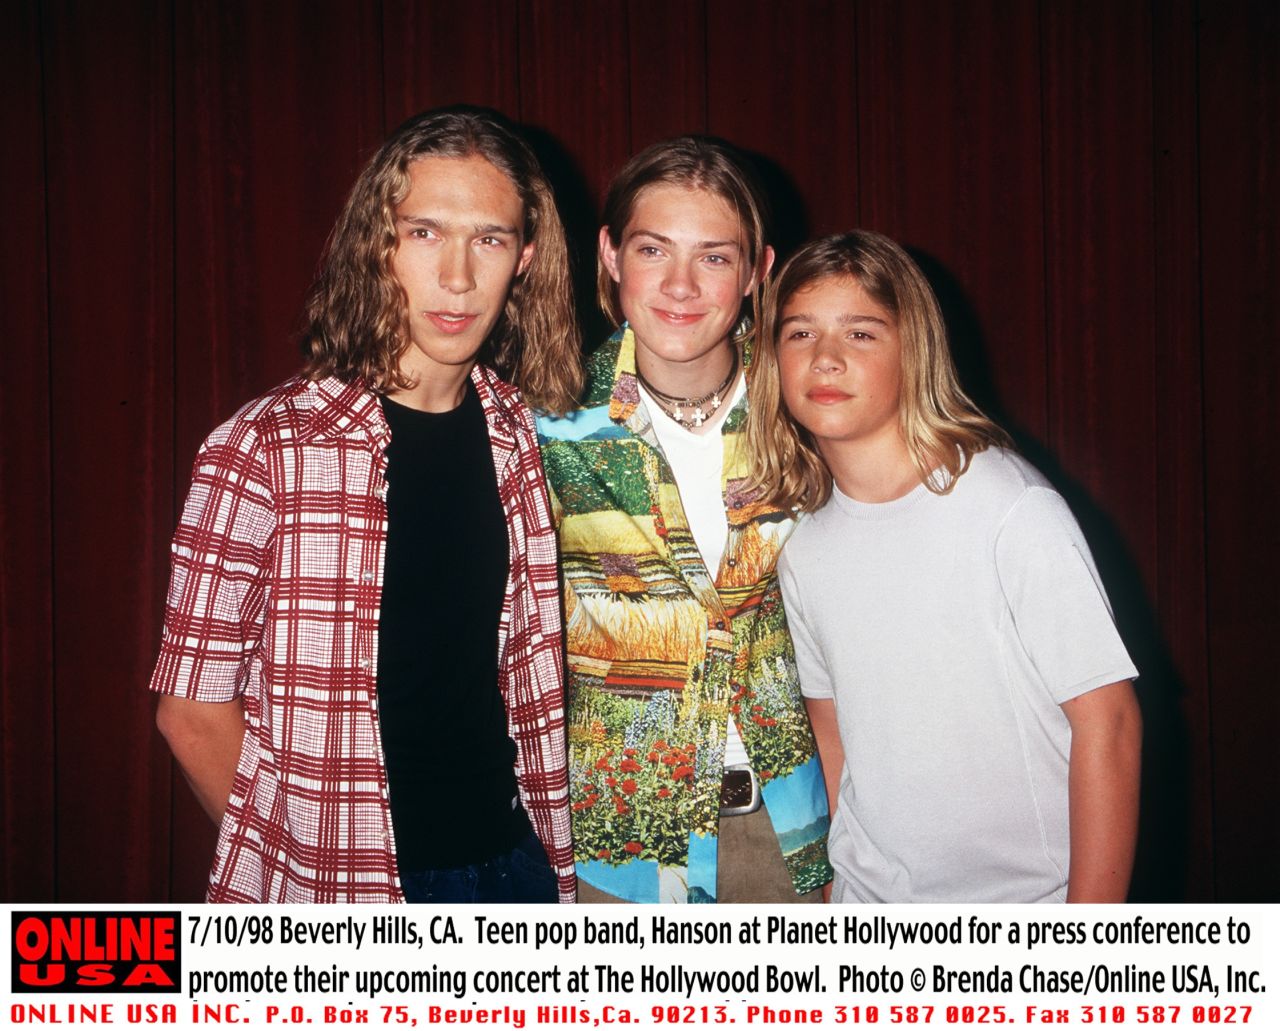 Isaac, Taylor and Zac Hanson achieved heartthrob status shortly after releasing "MMMBop," the first single off their 1997 album "Middle of Nowhere."